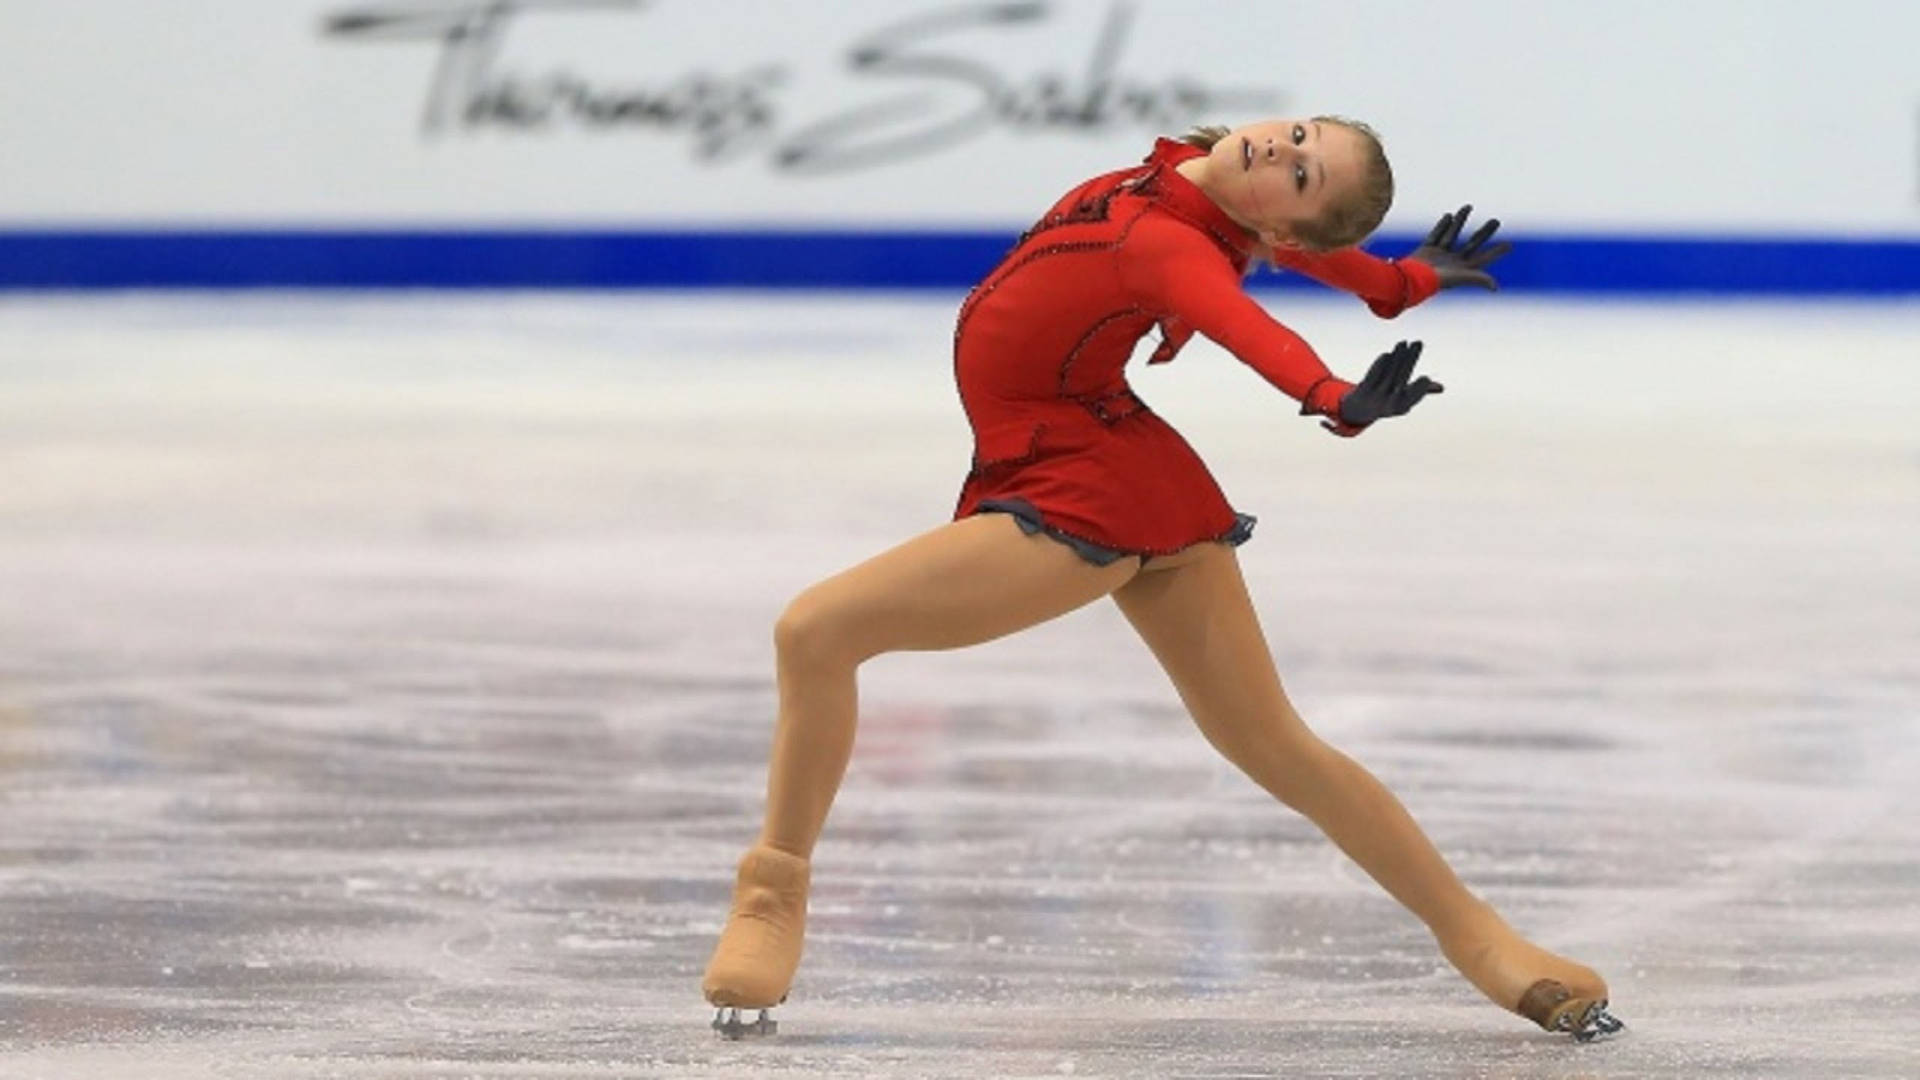 Inspiring Figure Skating Performance In The Olympics Background